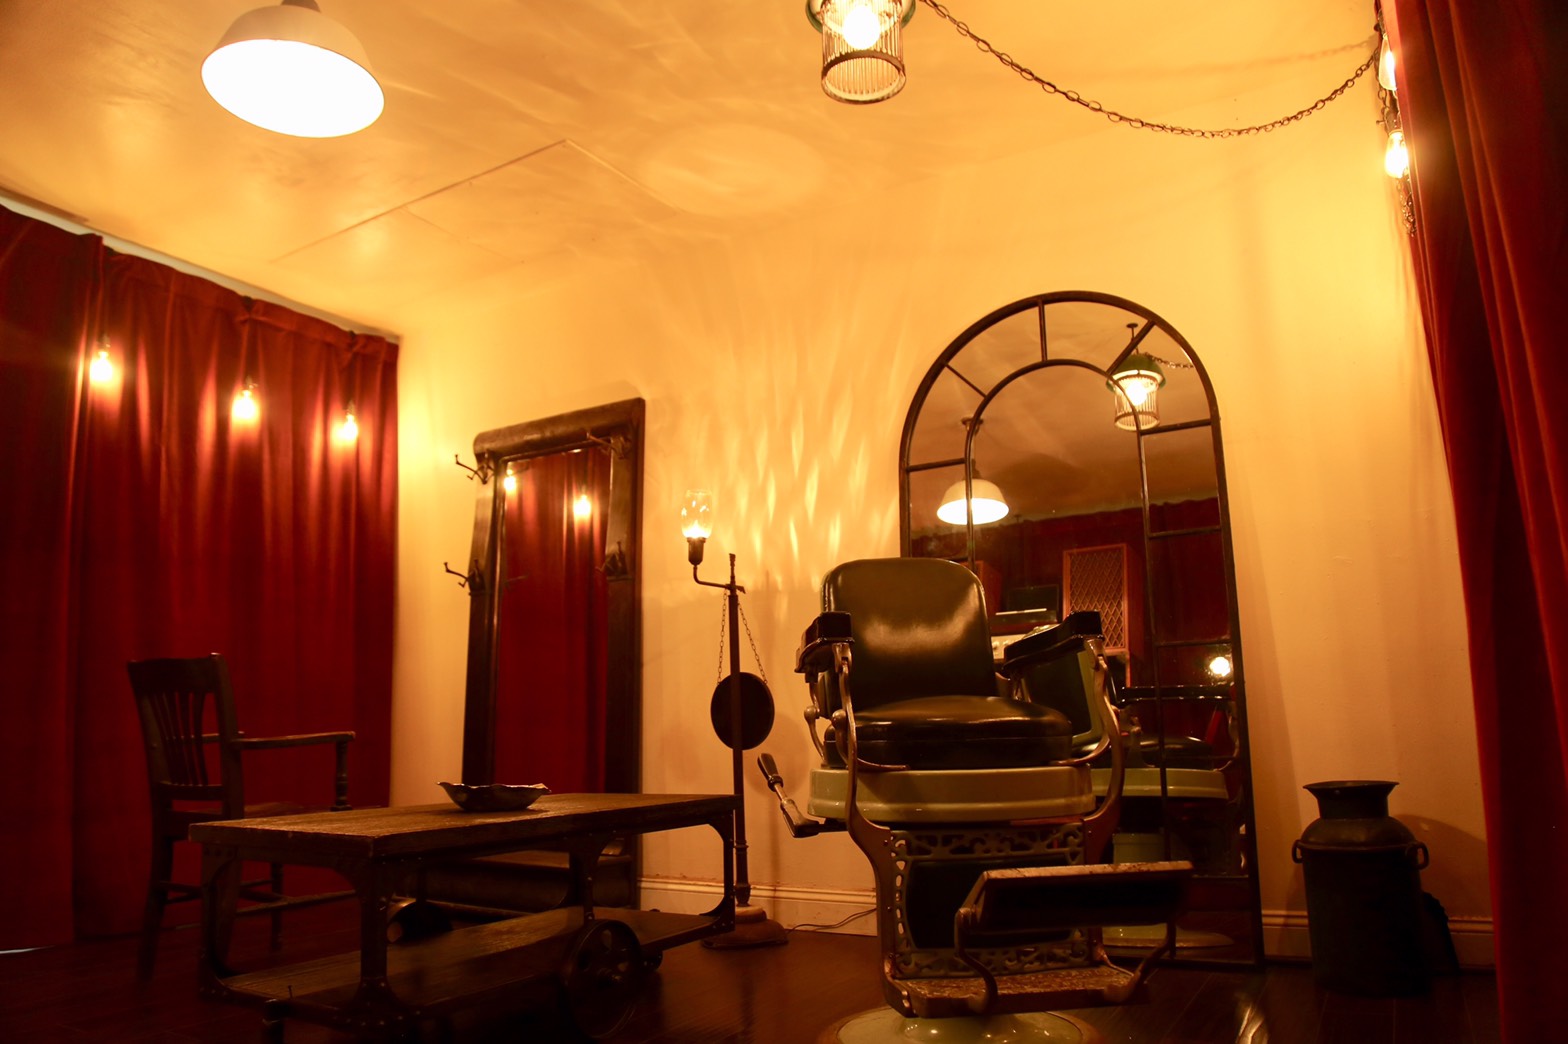 The downstairs of the salon